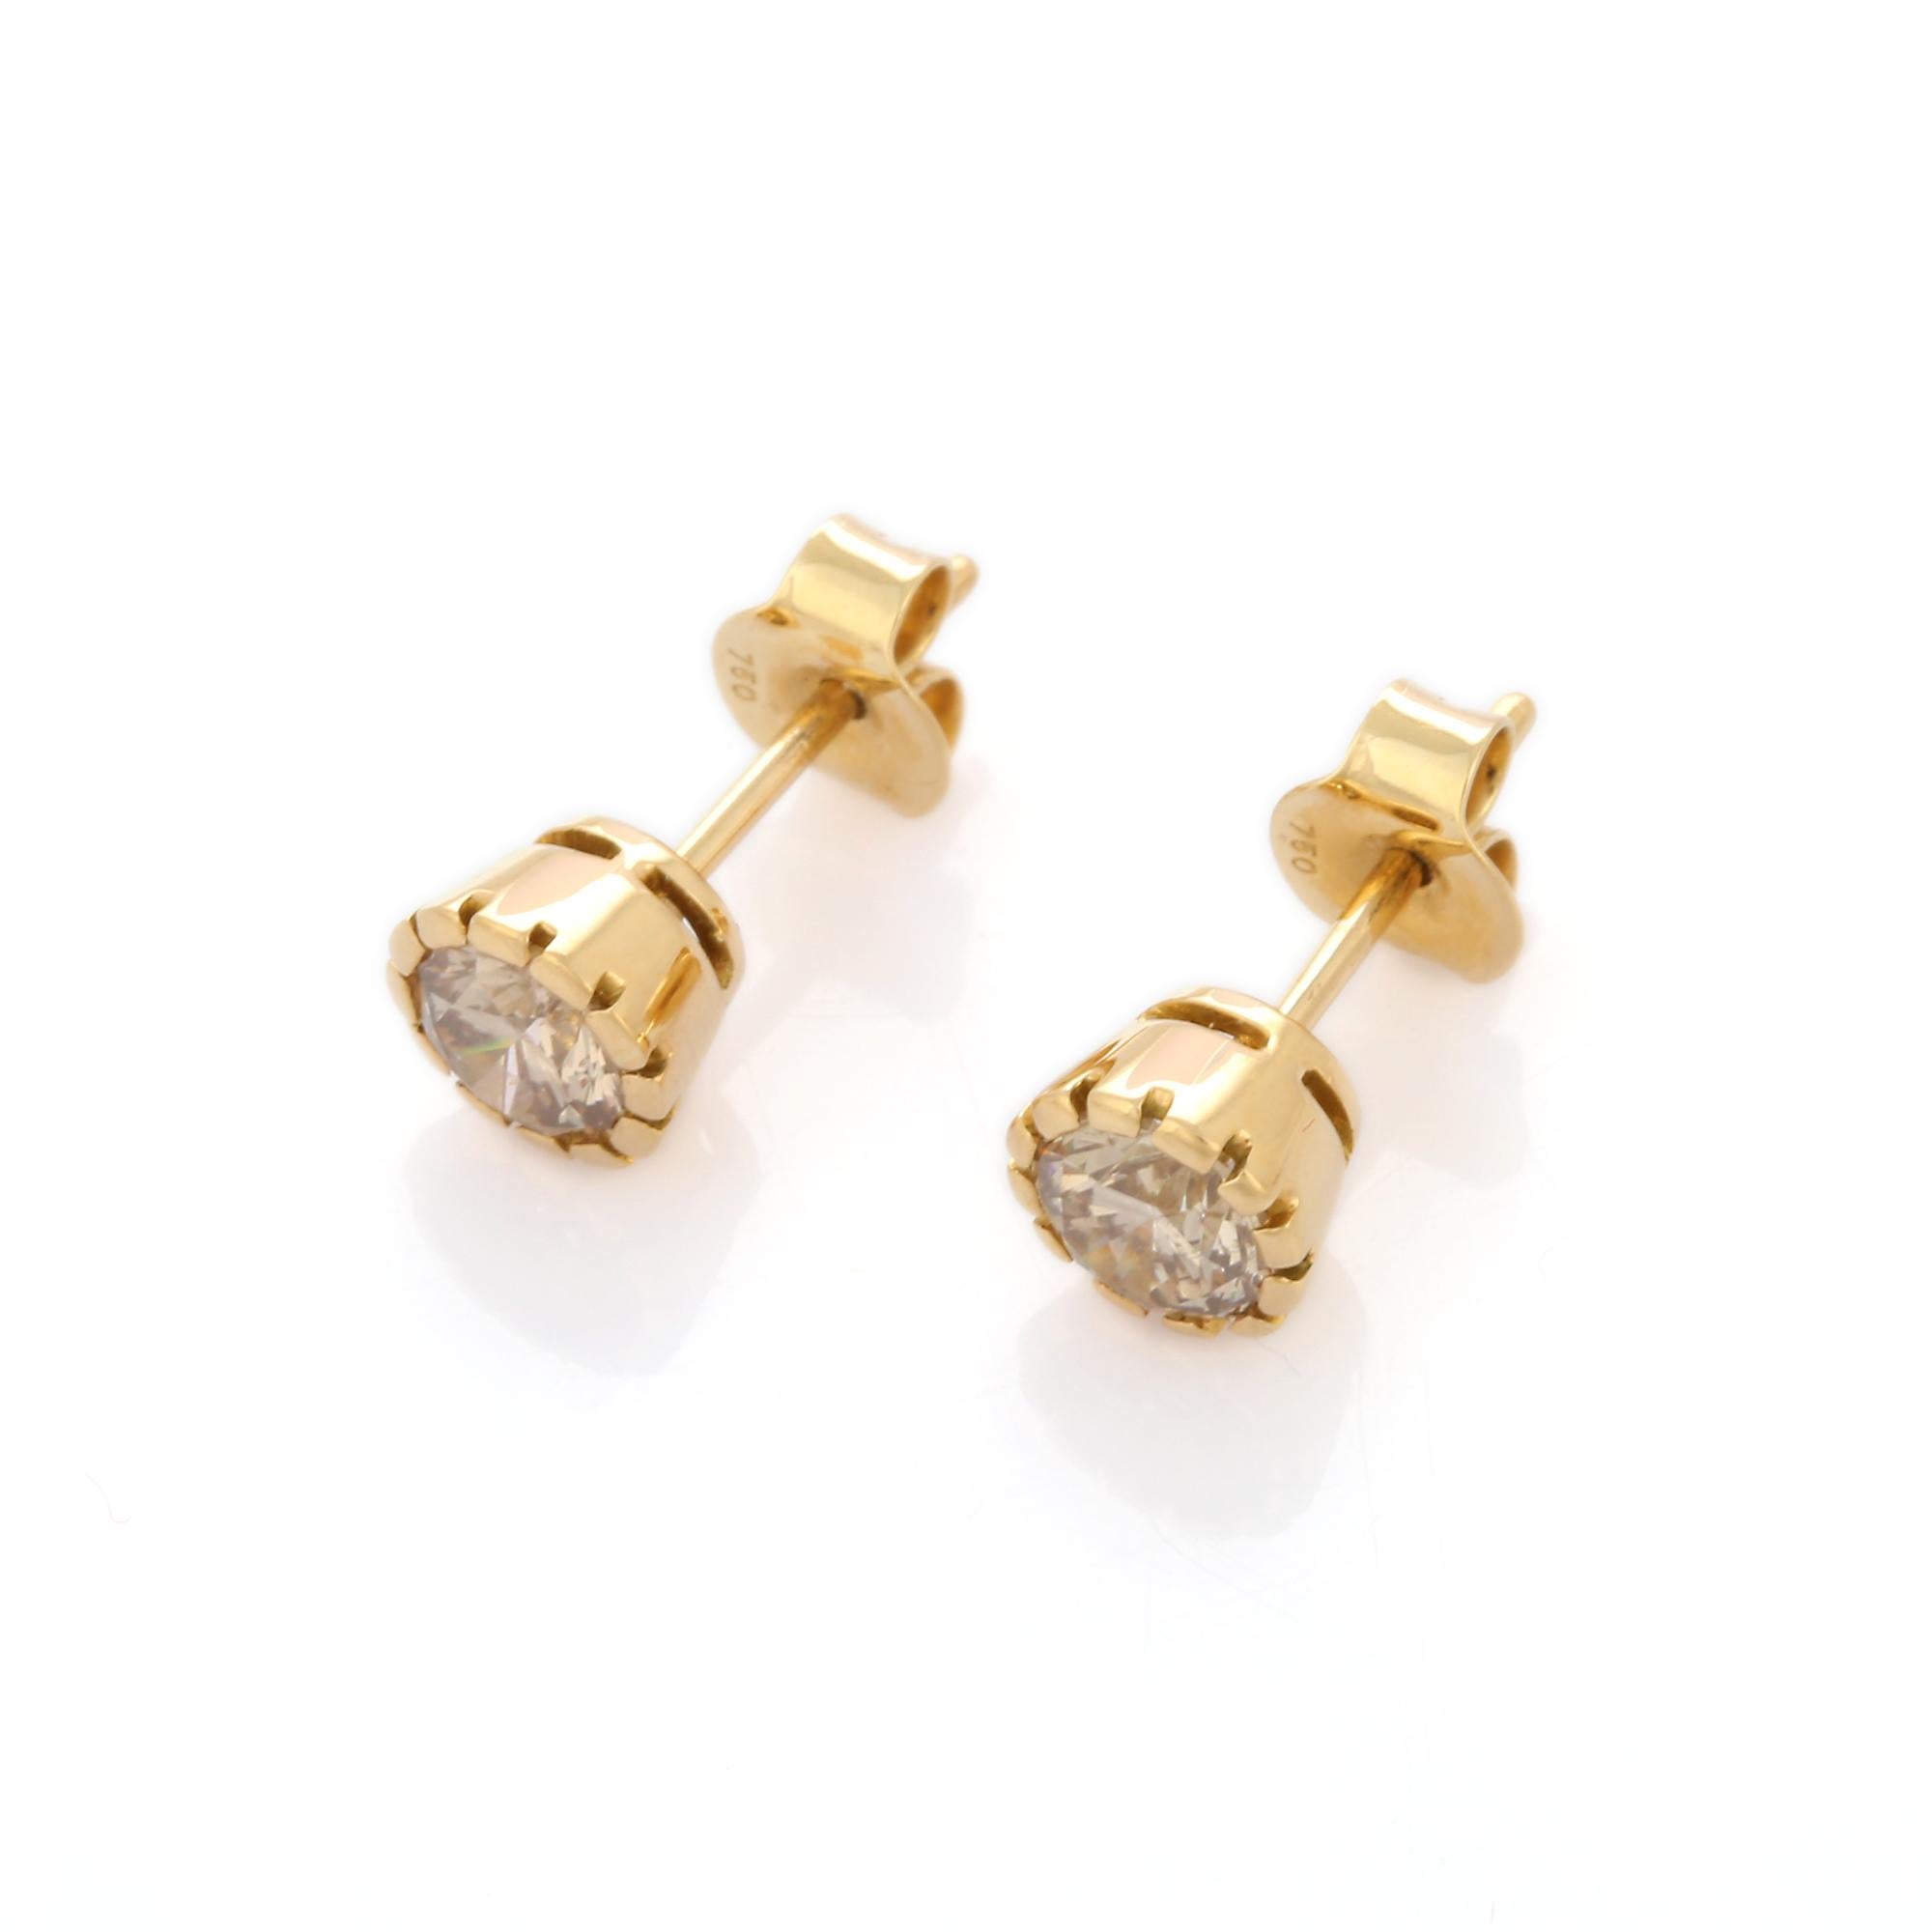 Faceted Diamond Stud Earrings Gift for Mom in 18K Gold to make a statement with your look. You shall need dangle earrings to make a statement with your look. These earrings create a sparkling, luxurious look featuring round cut diamond.
April